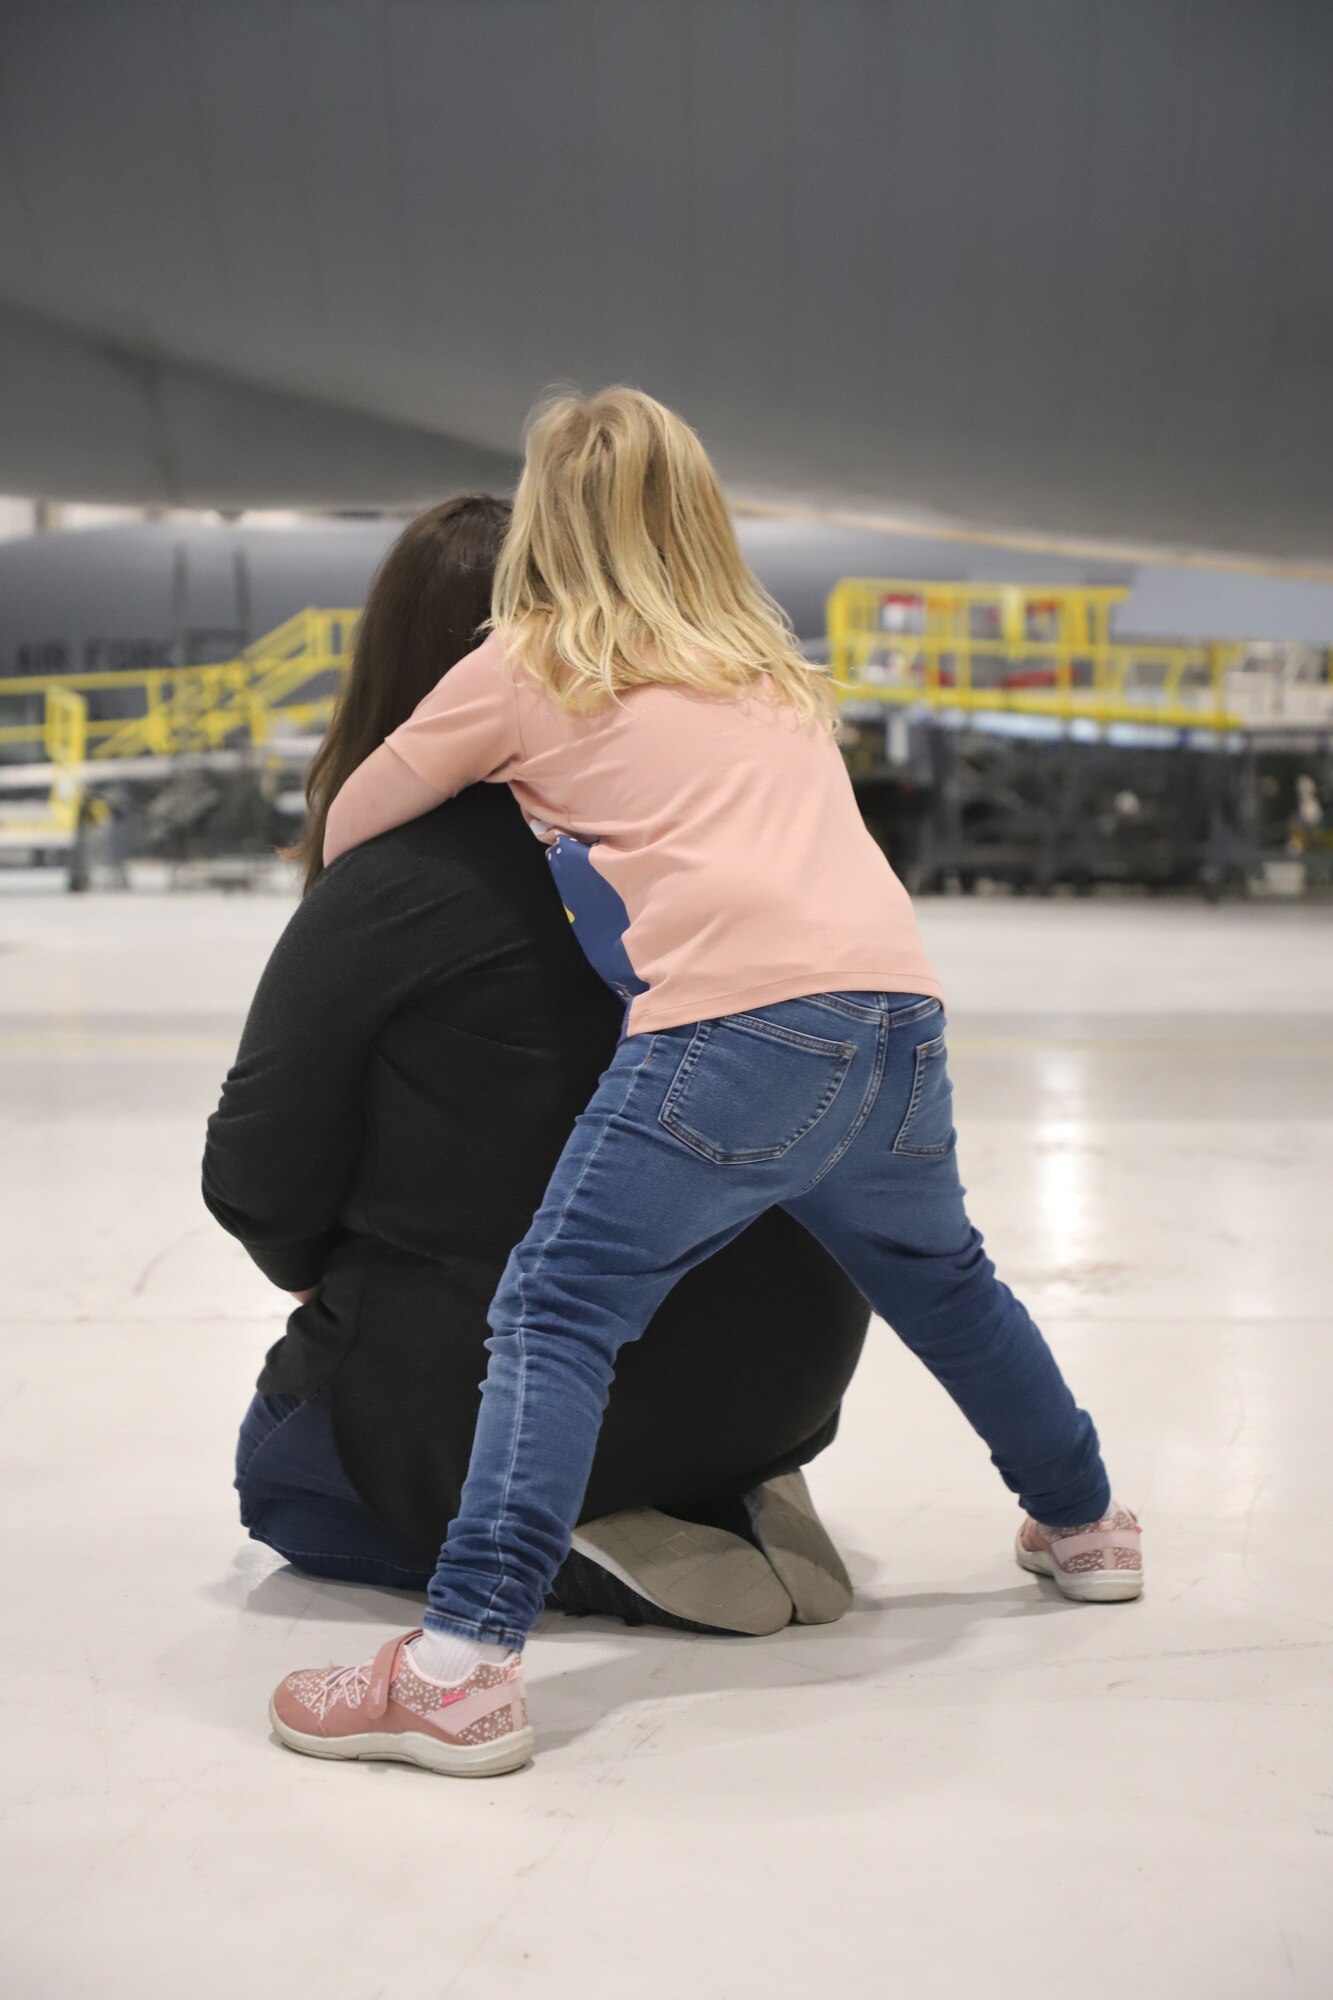 Tinley Benyshek, Pilot for the Day, hugs her mother, Tia Benyshek, at the 190th Air Refueling Wing in Topeka, KS, October 24, 2022. Tinley is the first Pilot for a Day participant at the 190th ARW.